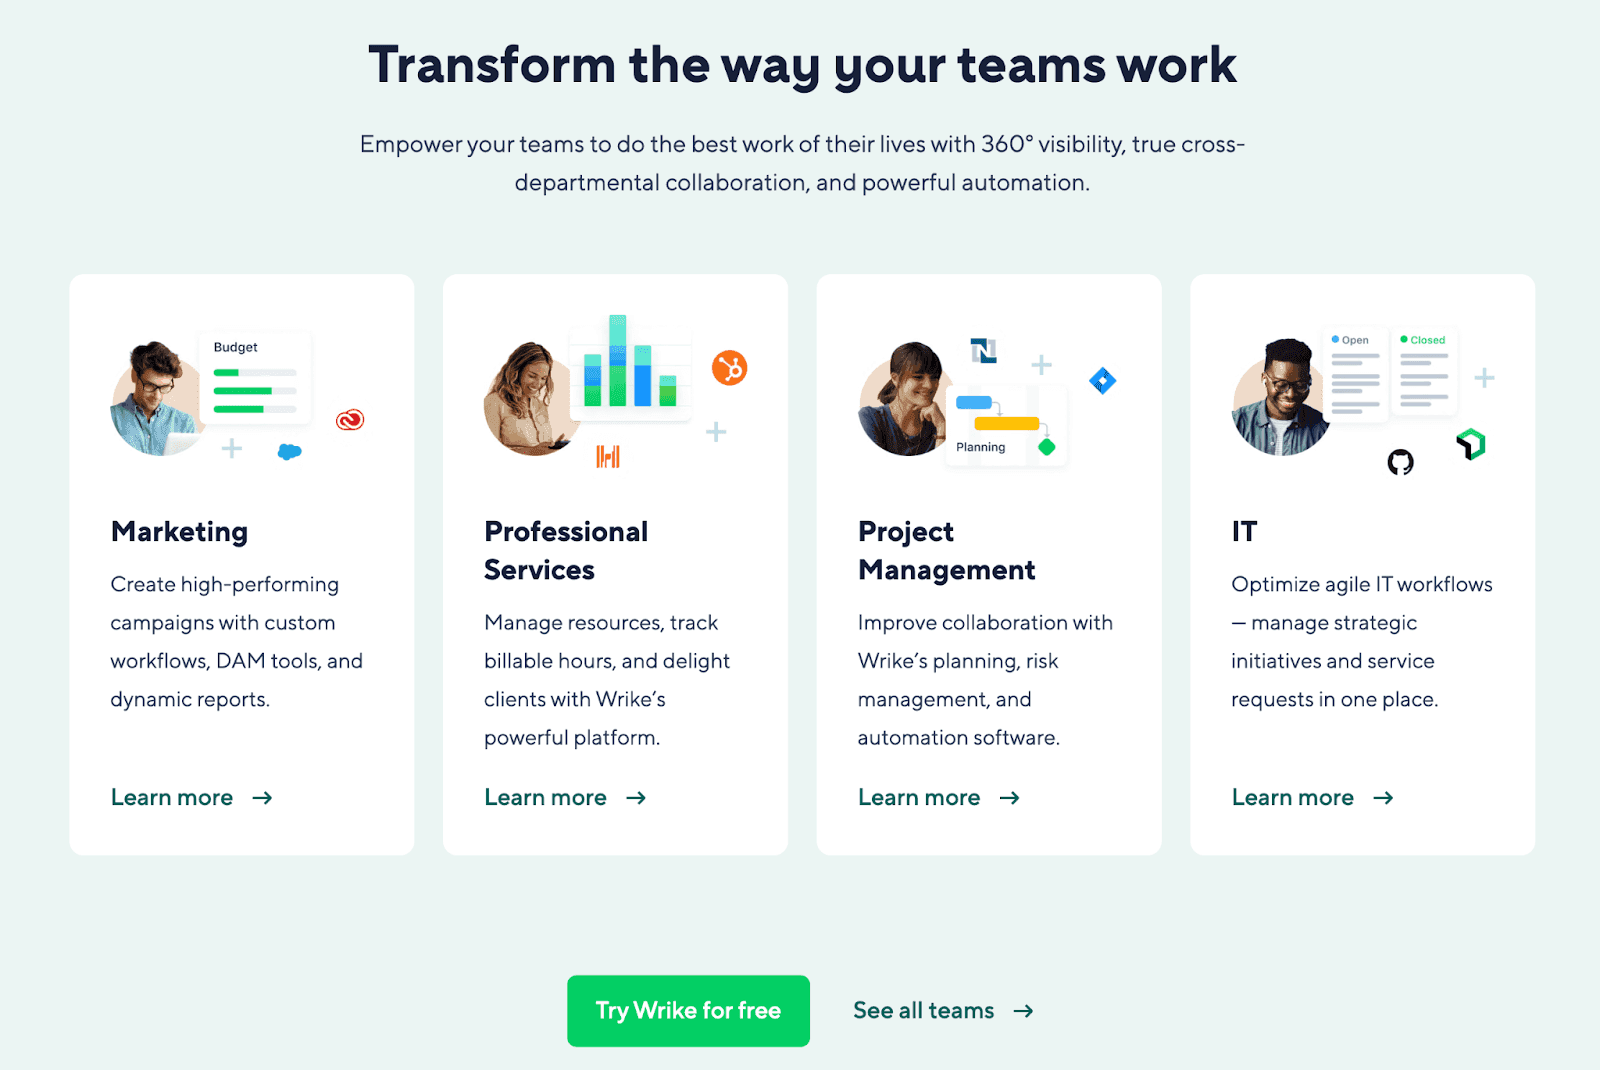 Wrike website - Transform the way your teams work